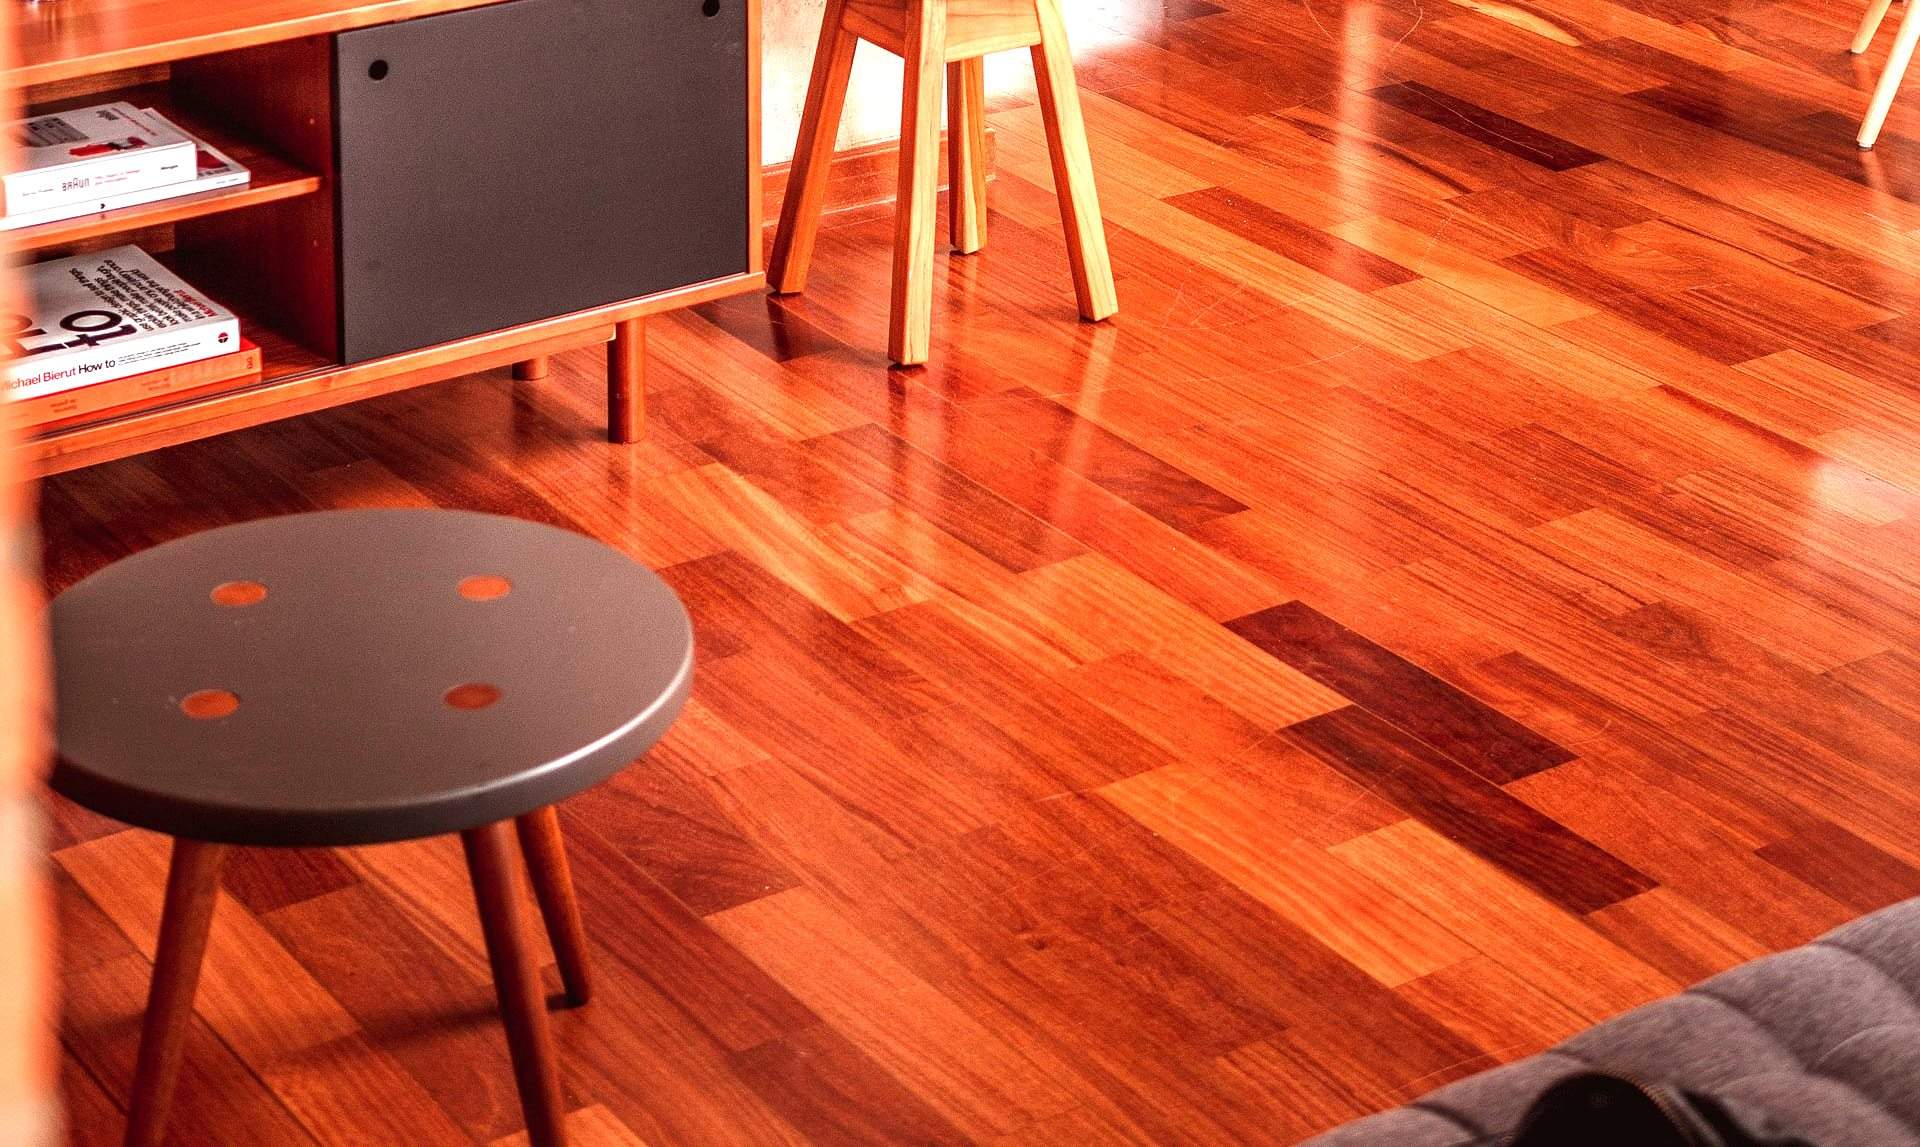 Factors Affecting the Cost of Laminate Flooring